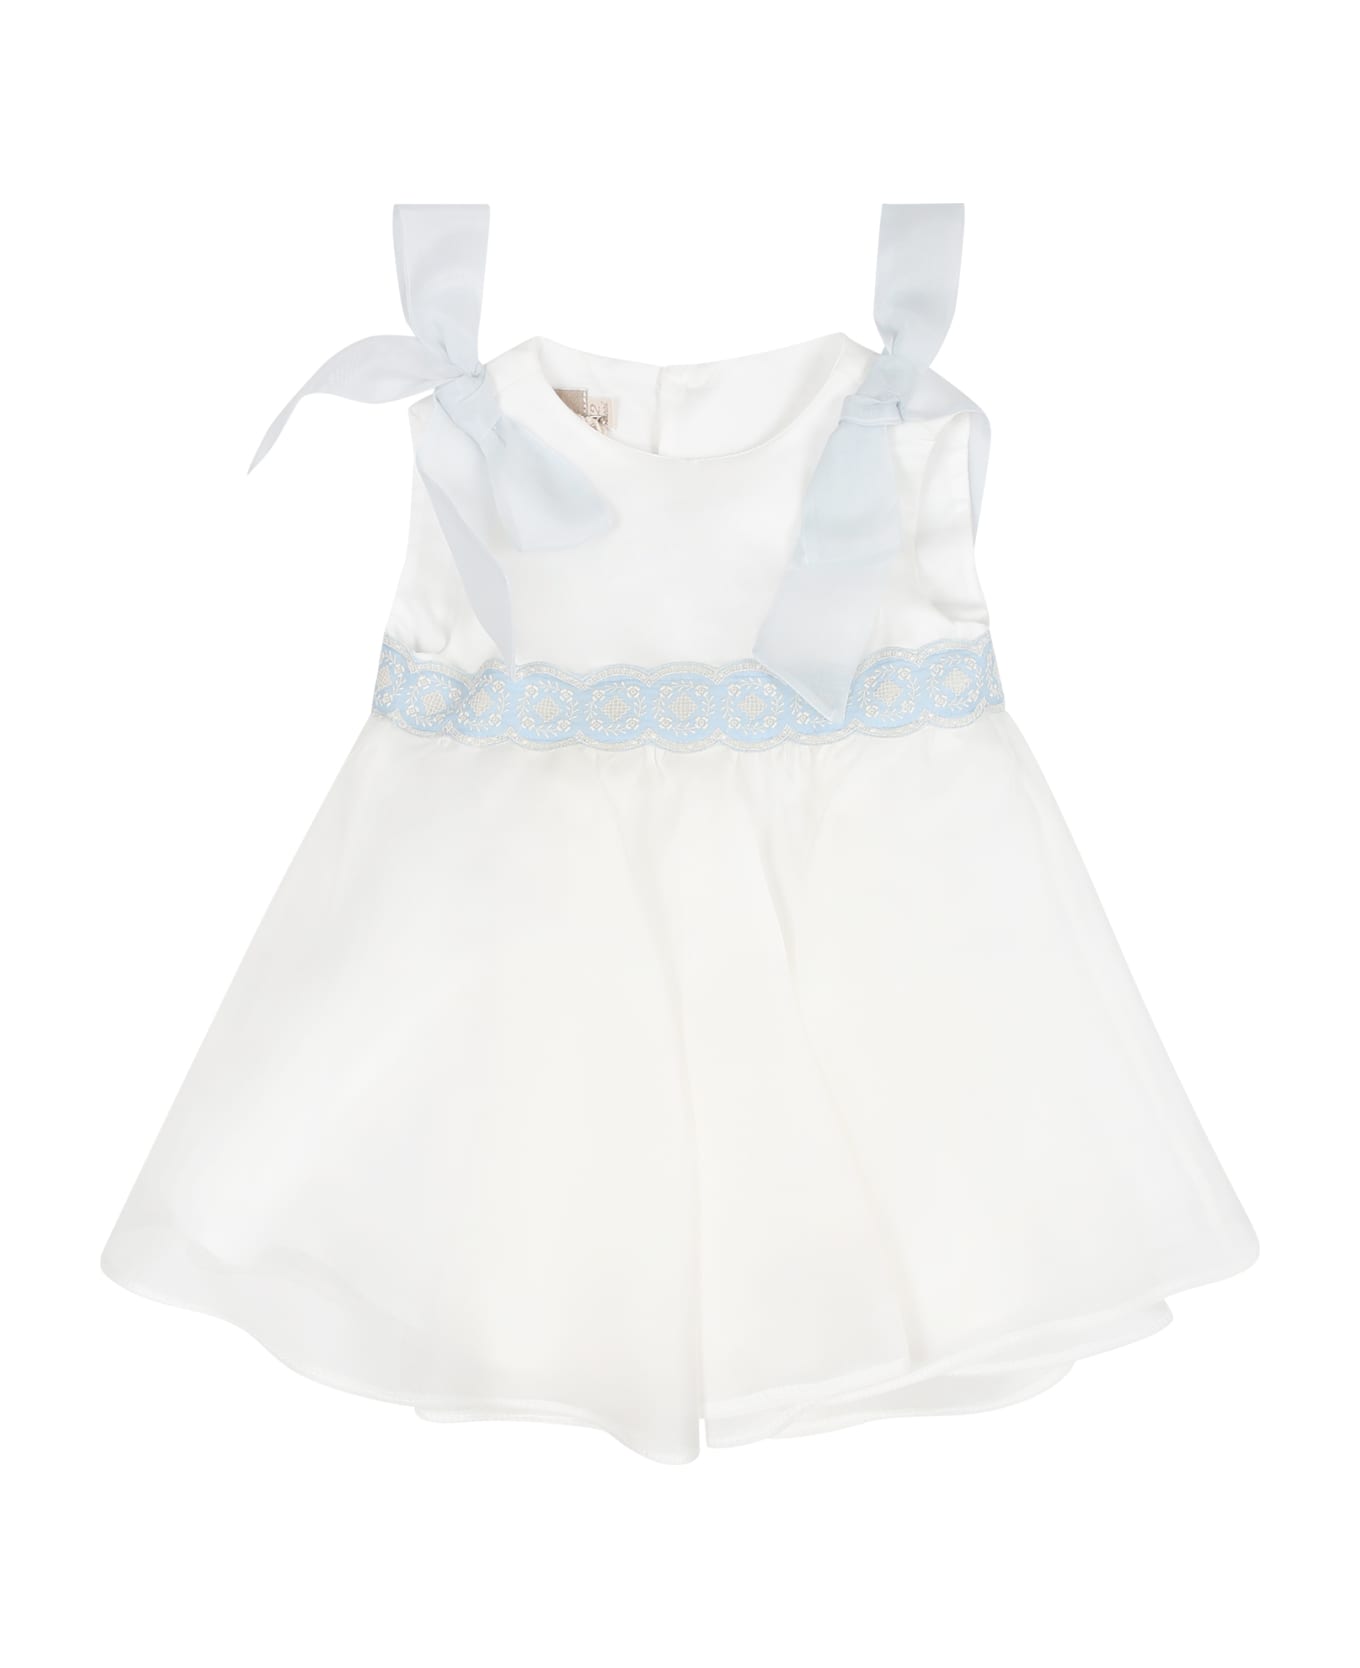 La stupenderia White Dress For Baby Girl With Light Blue Embroidery - White ウェア